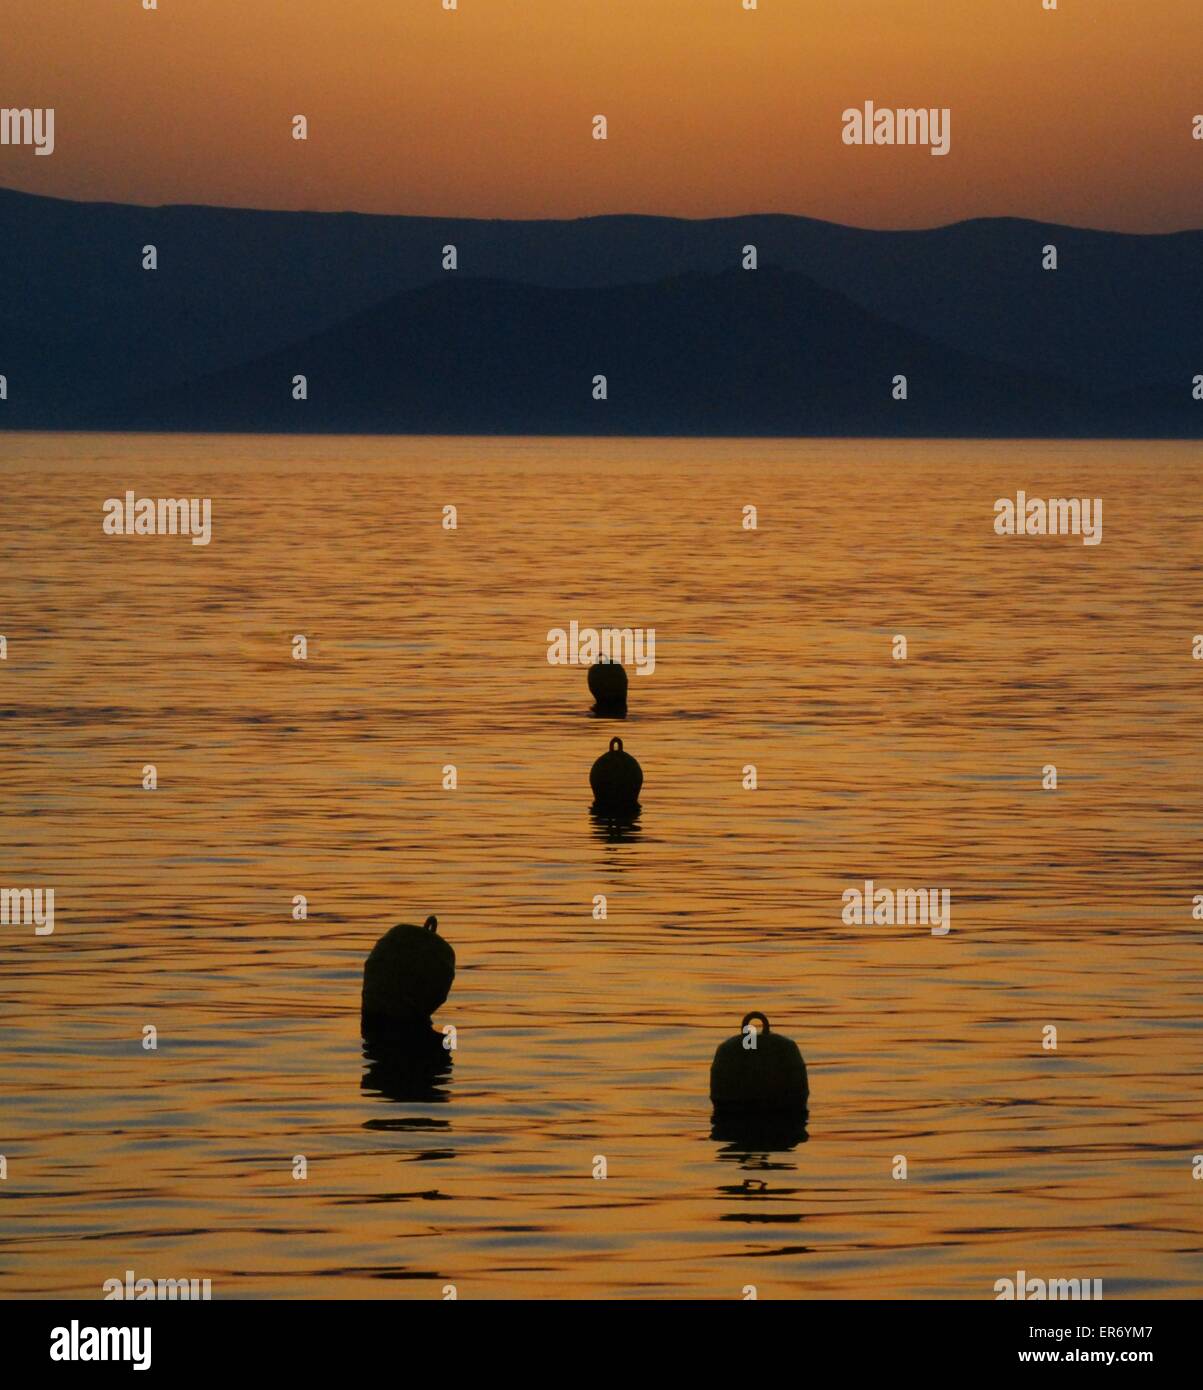 Marker buoys floating in the shimmering light of a glowing orange sunset Stock Photo